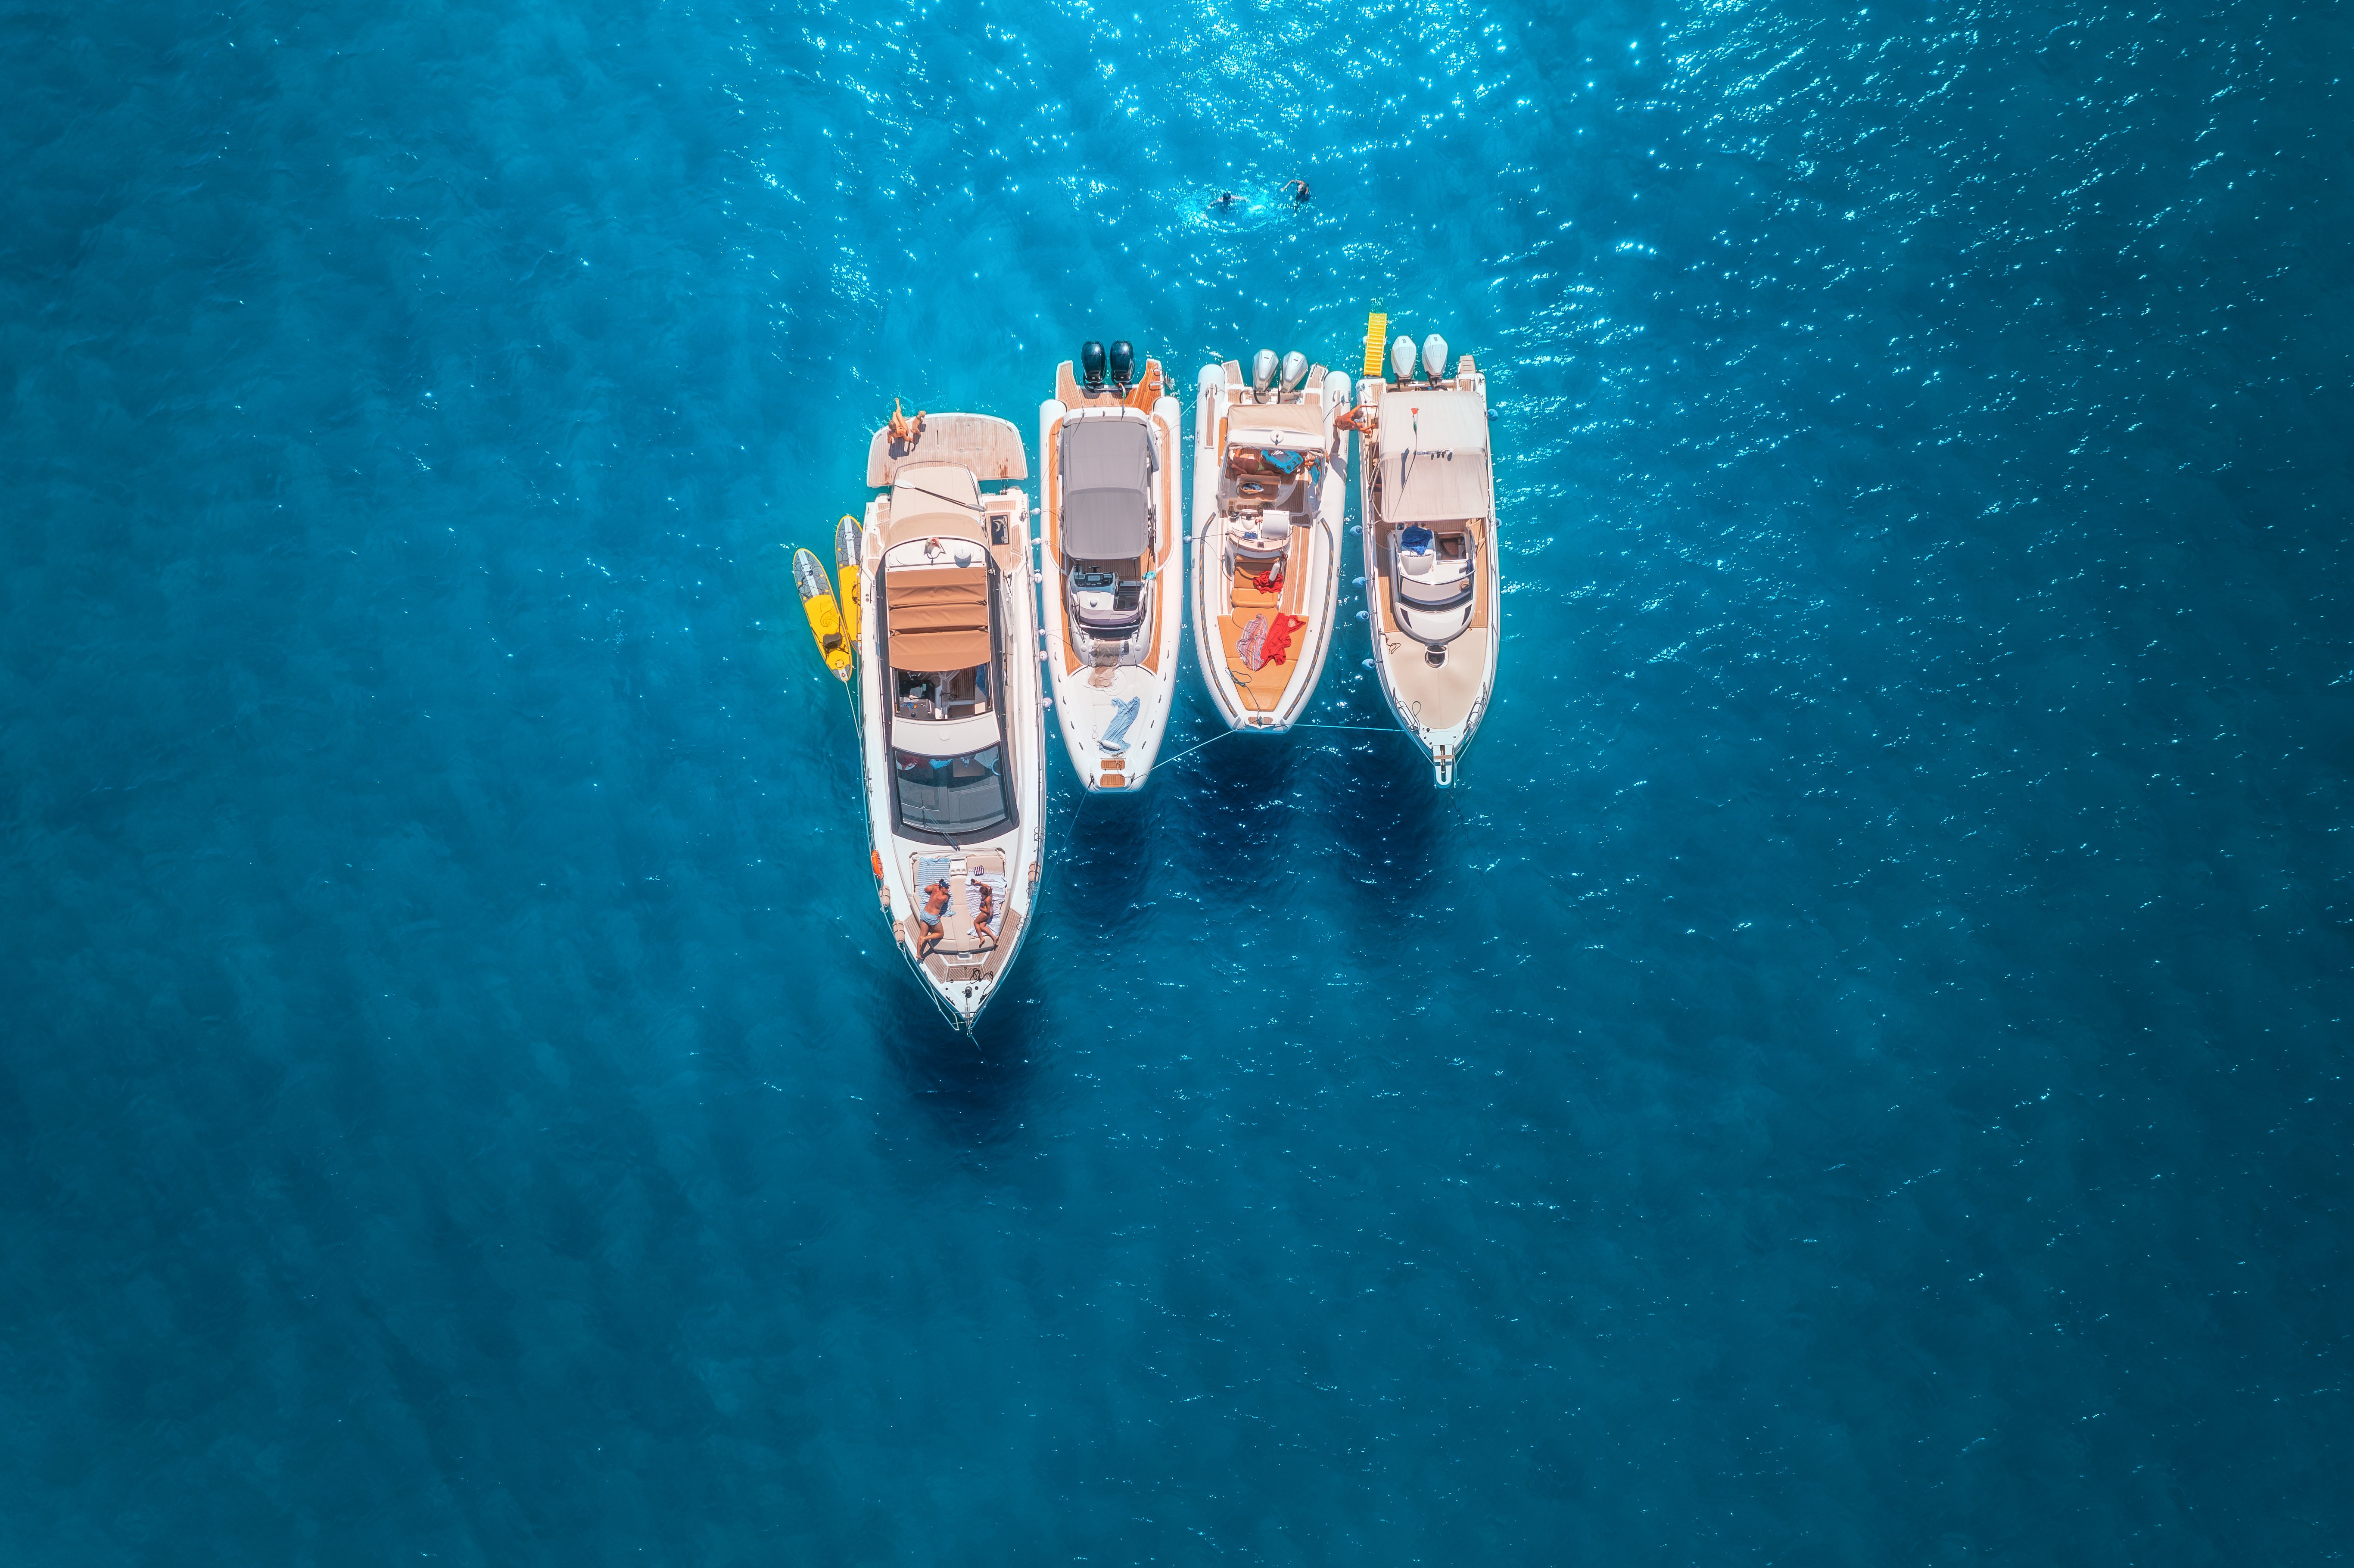 Does Size Matter When it Comes to Boats? Check Out these Top Small Speedboats